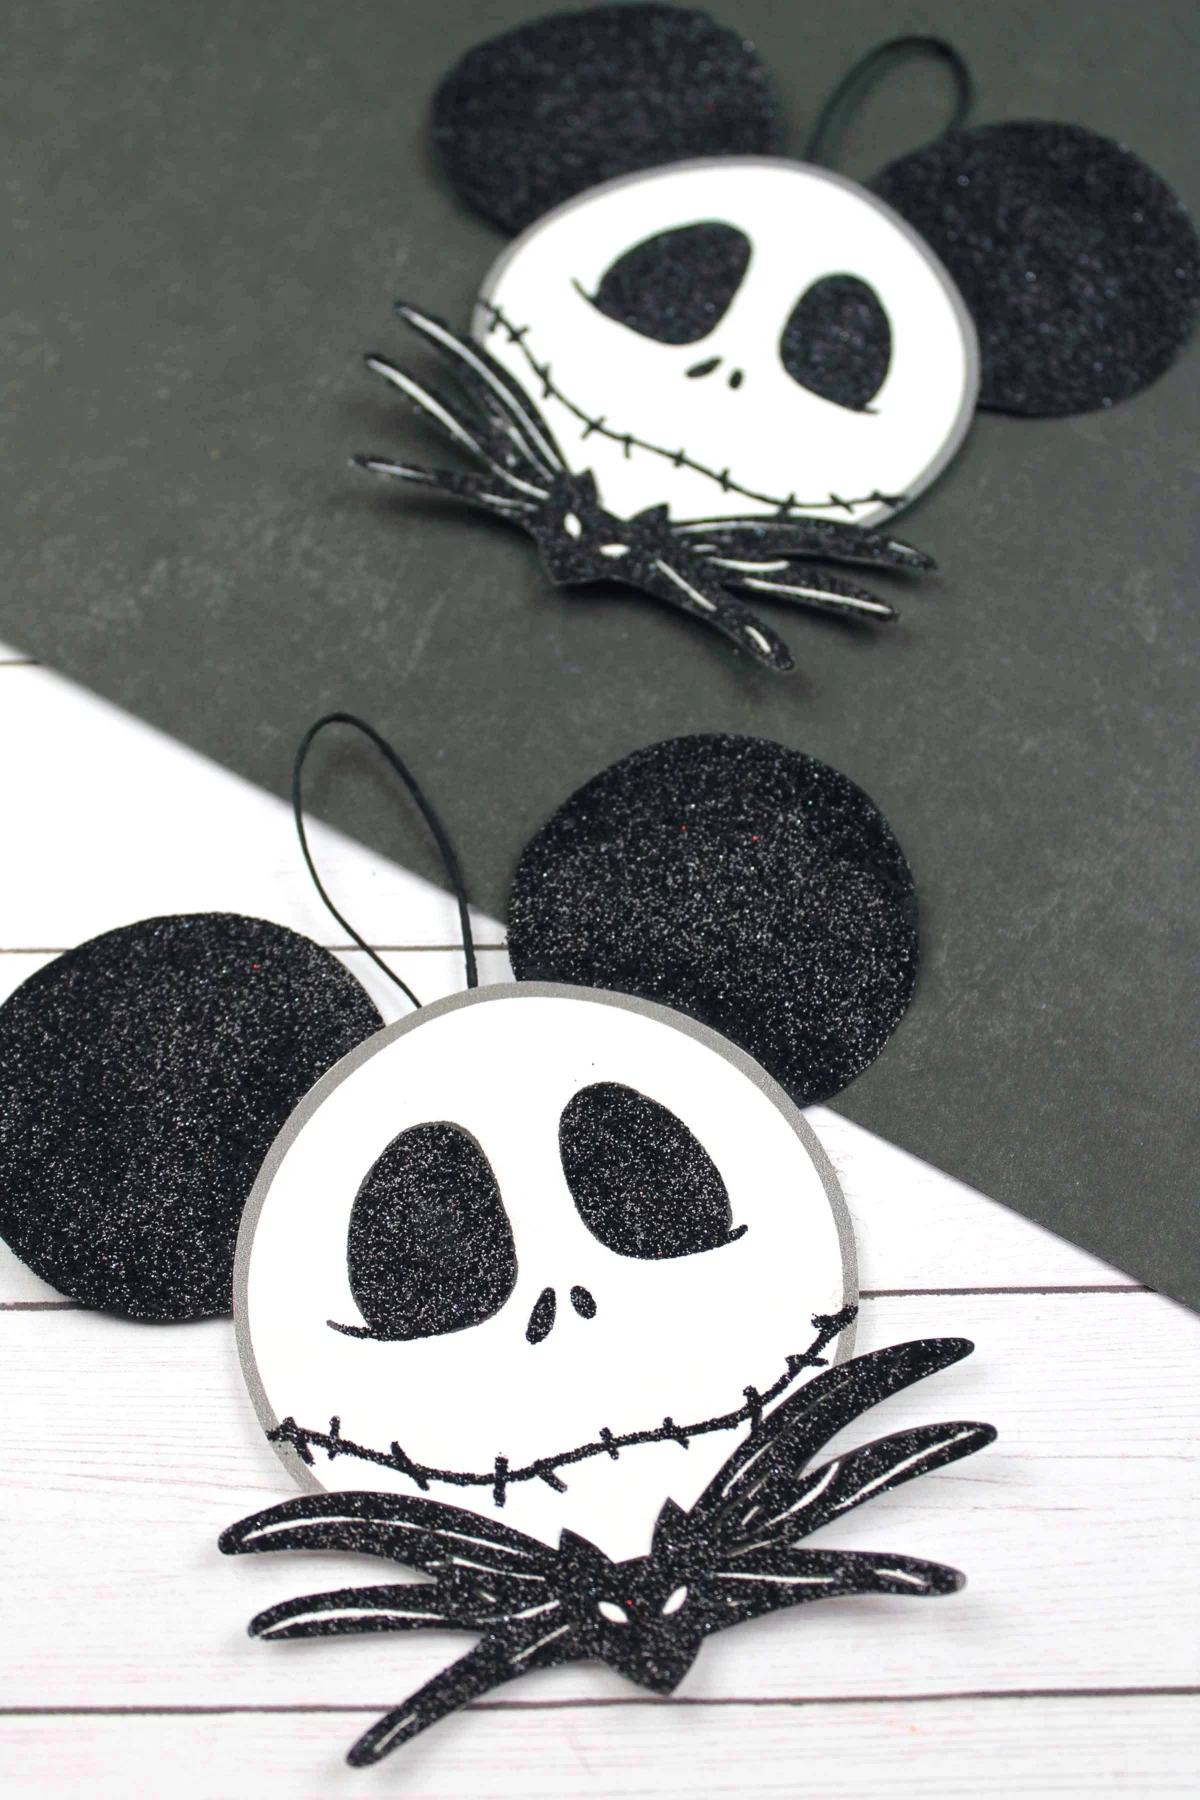 This DIY Nightmare before Christmas themed Mickey ear ornament featuring Jack Skellington is easy to make with the free printable template!